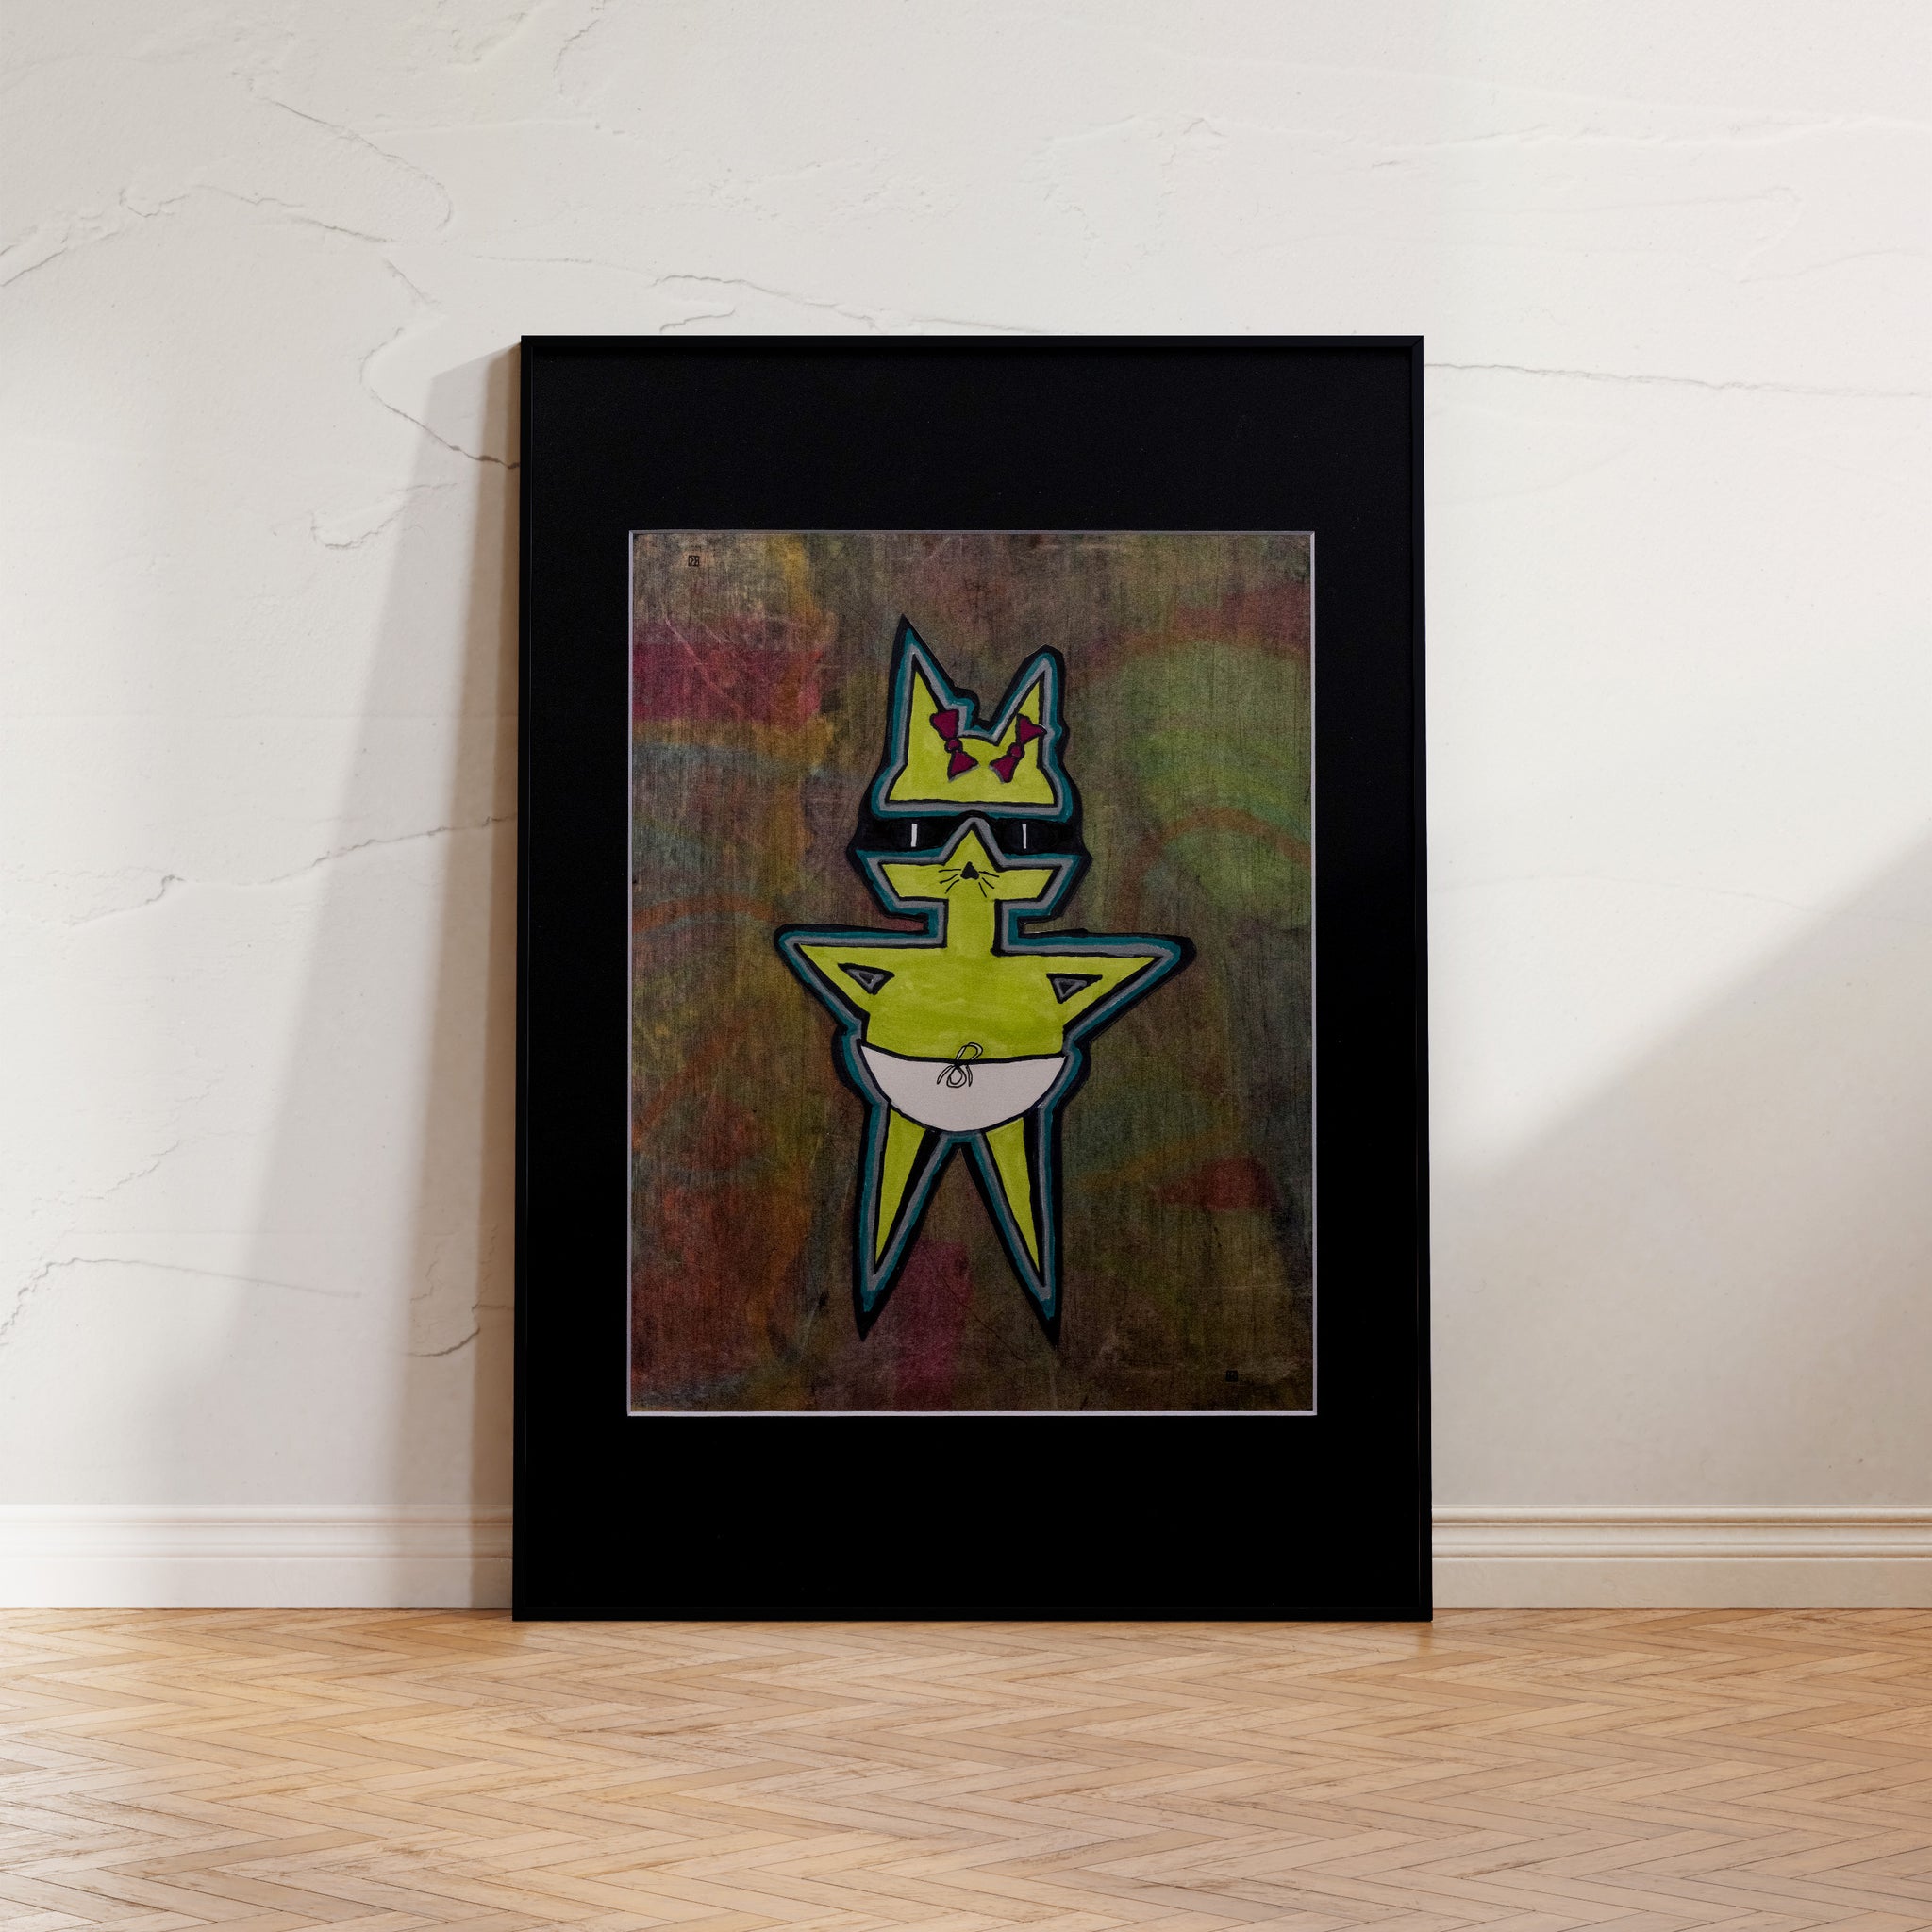 "Cool Cat," a vibrant poster featuring a geometrically abstracted cat in light green and dark yellow tones, wearing sunglasses, imbued with an urban graffiti aesthetic and a retro-futuristic vibe.